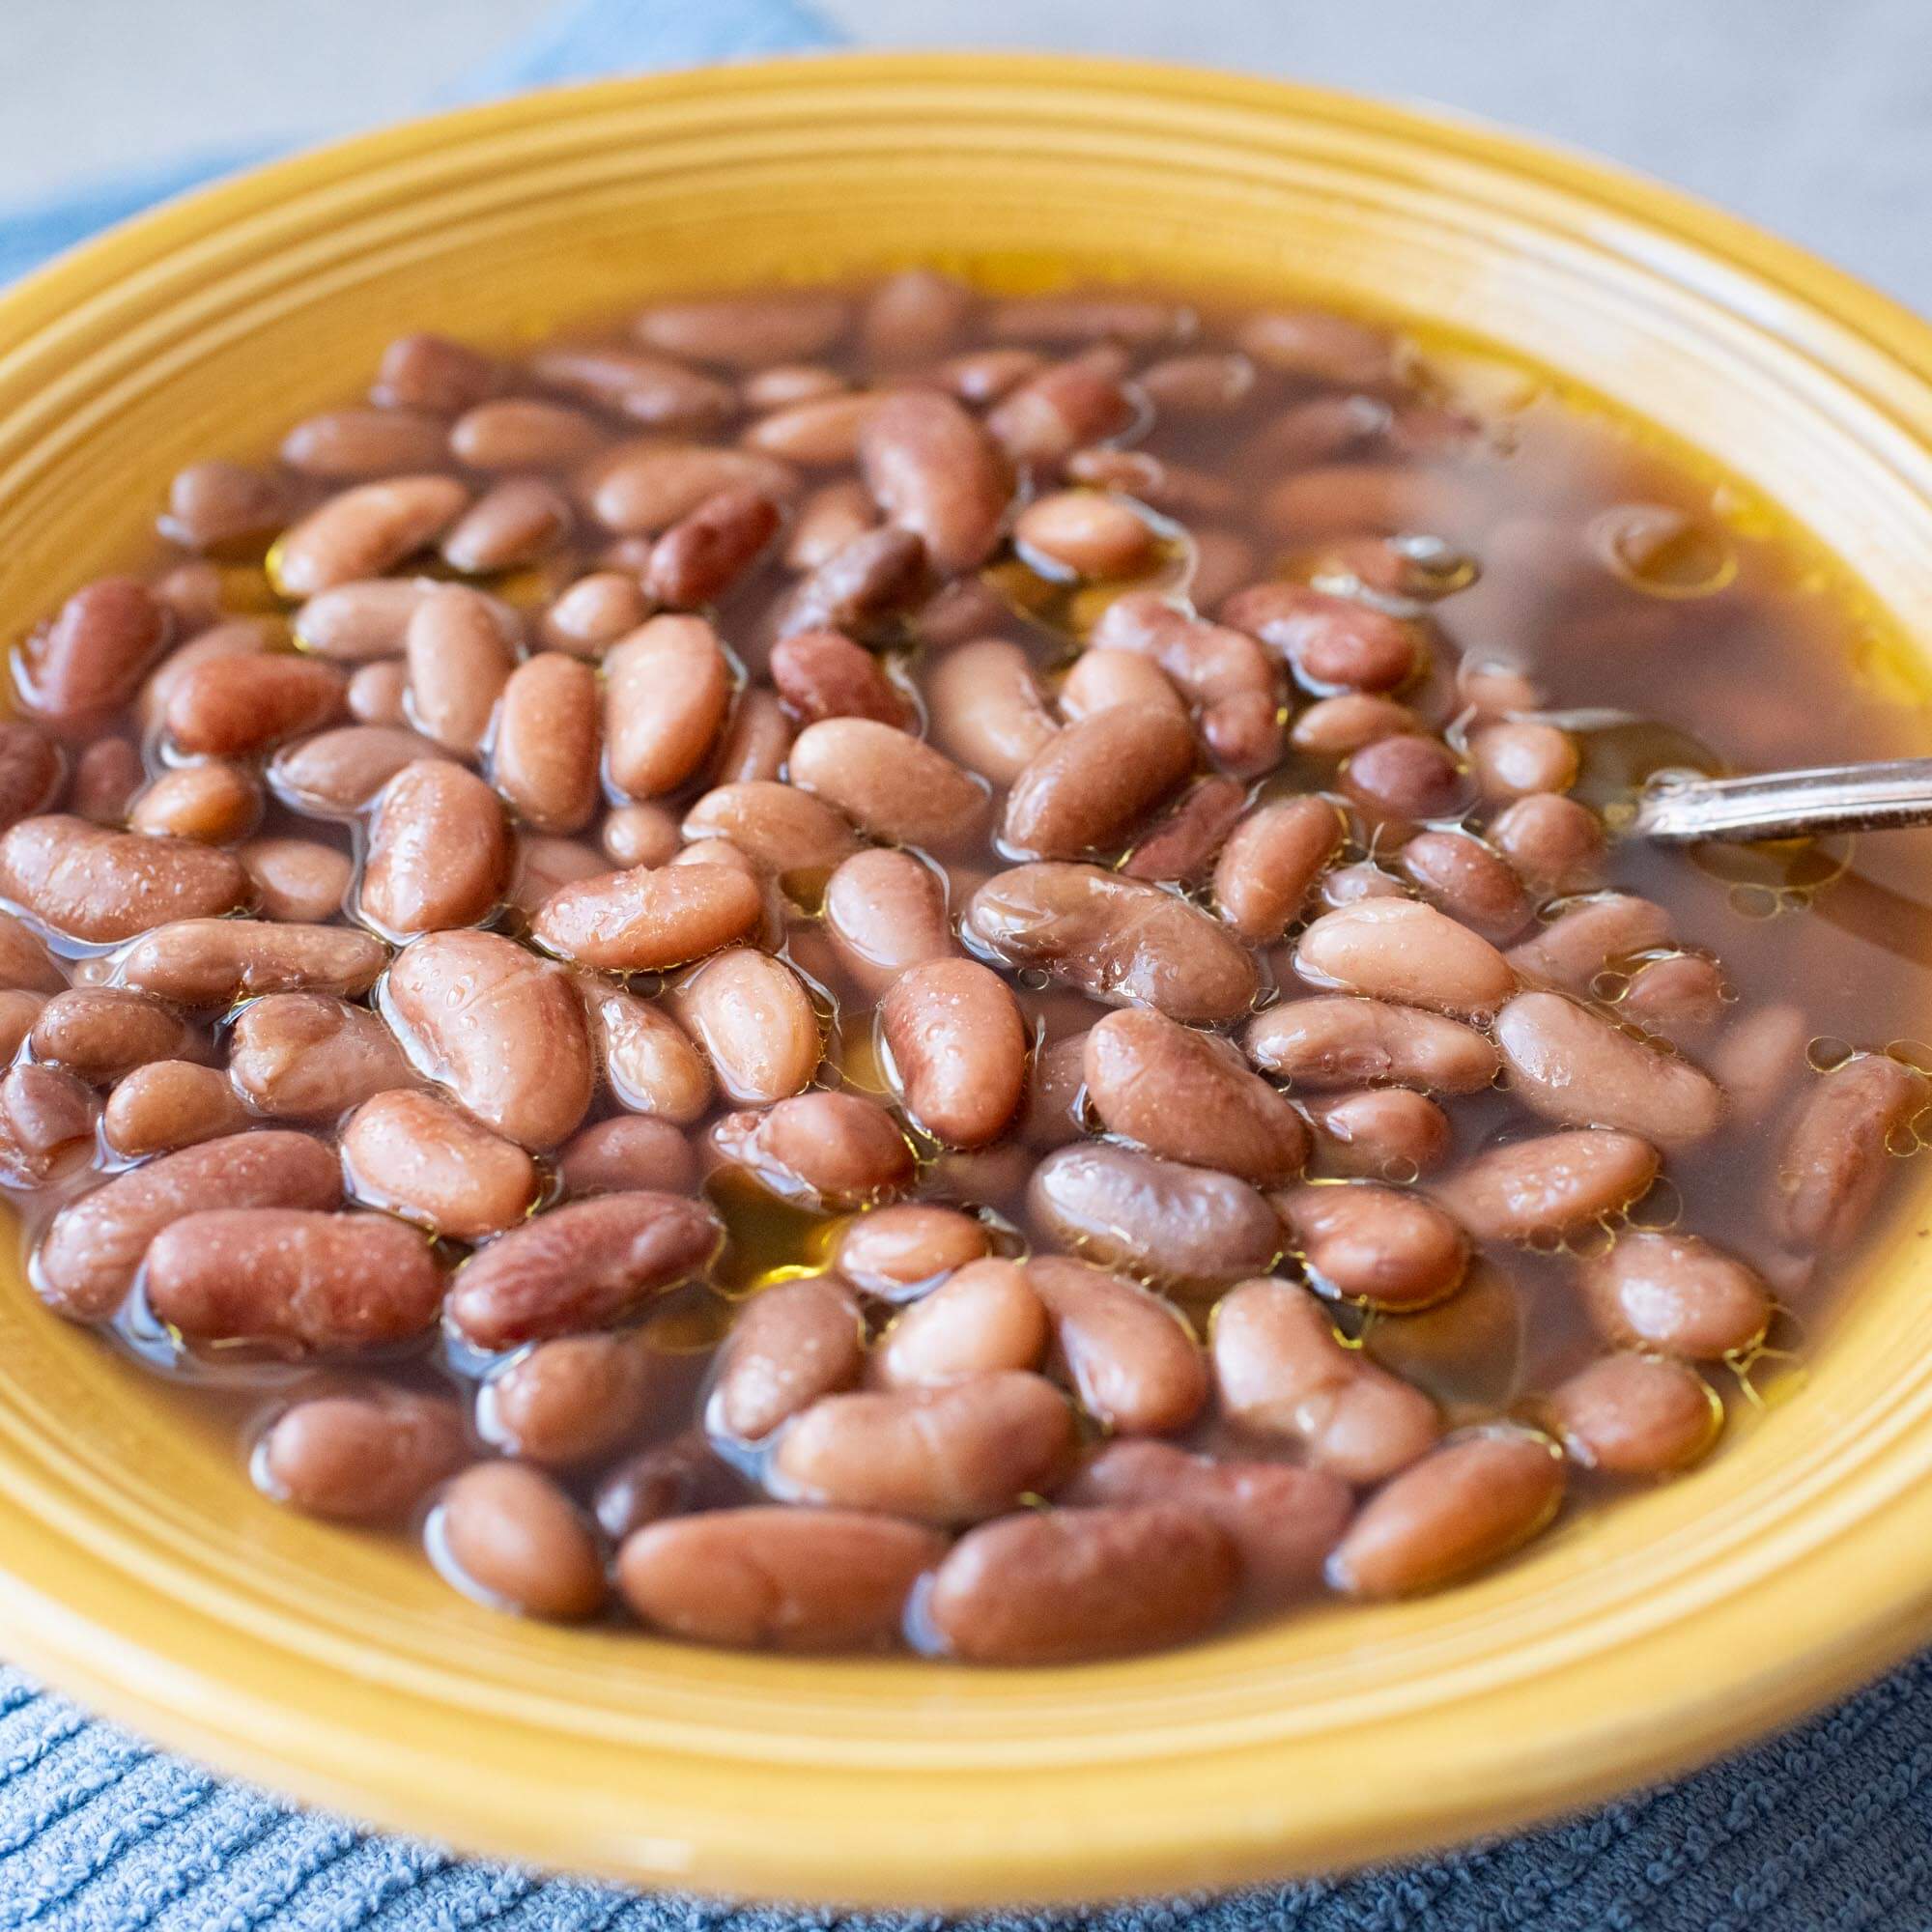 Primary Beans brothy Speckled Bayo beans